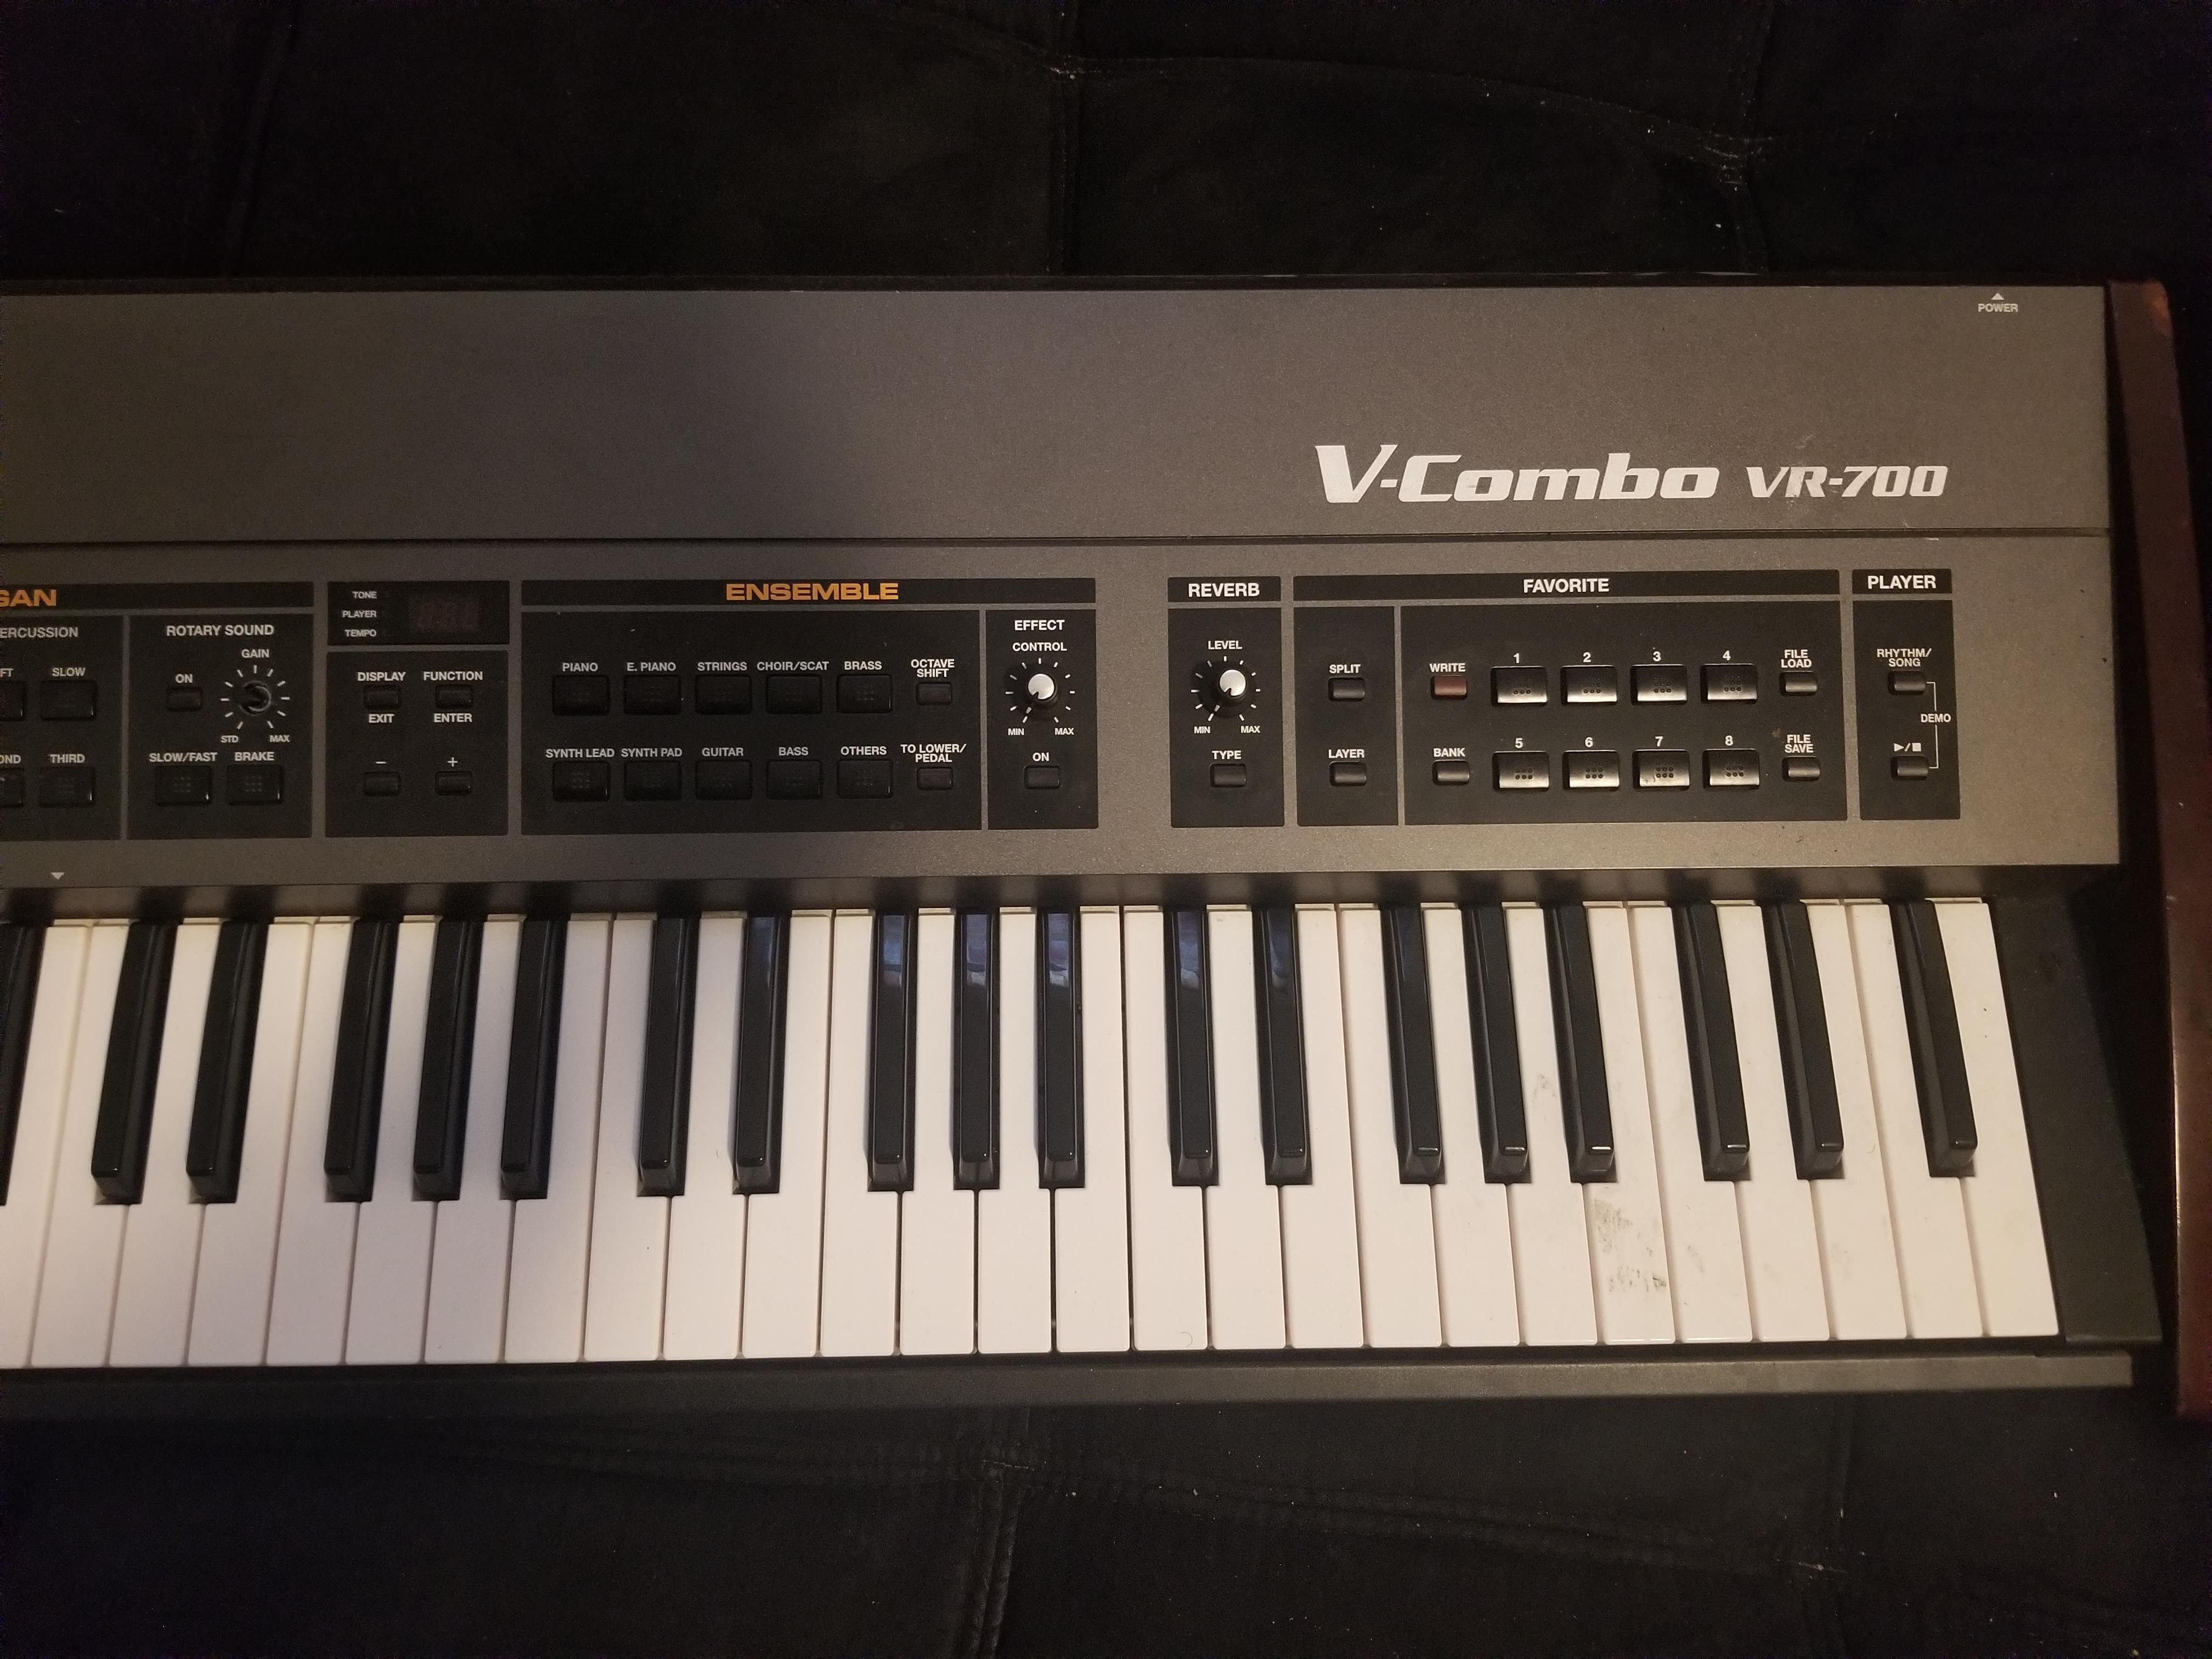 waste away mischief Empire Roland VR 700 V-Combo for Sale in San Jose, CA - OfferUp